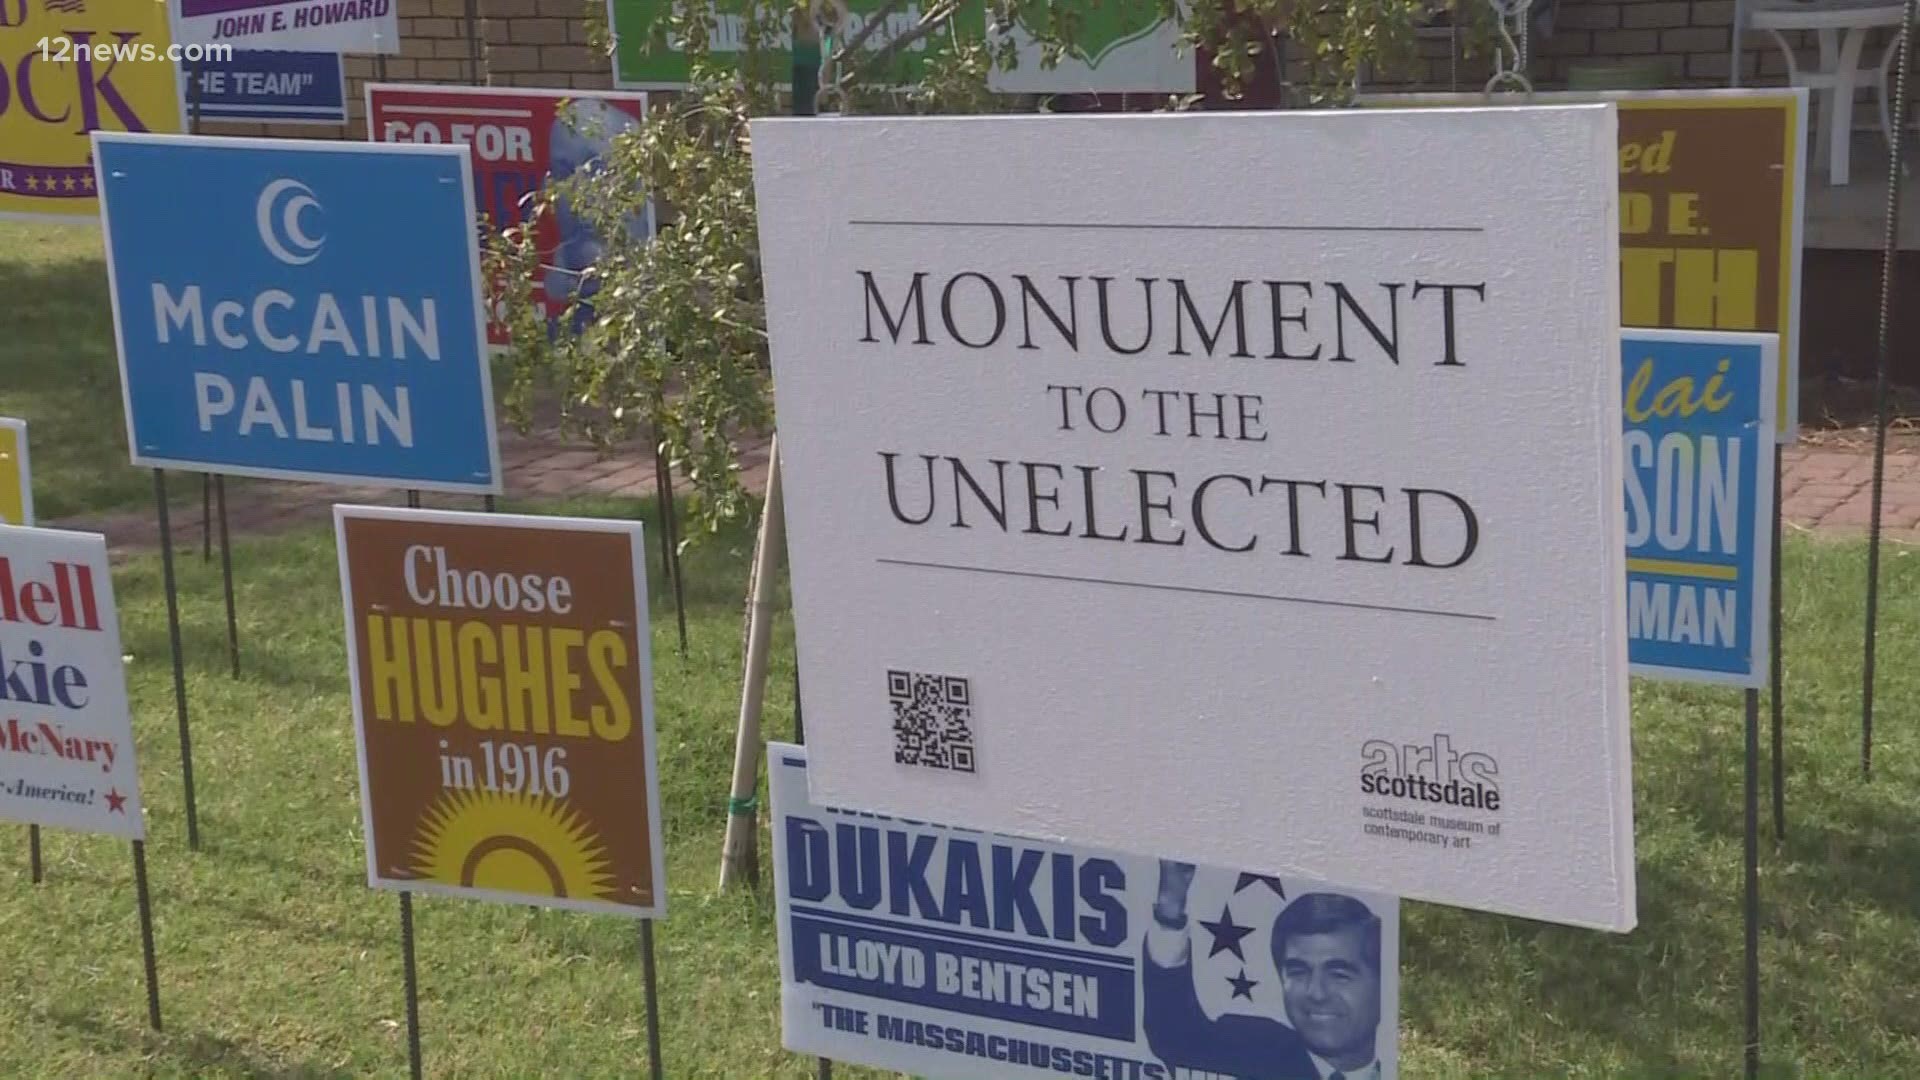 Every election year there is a winner and a loser. One Valley artist has a unique way to remember the candidates that history forgot.